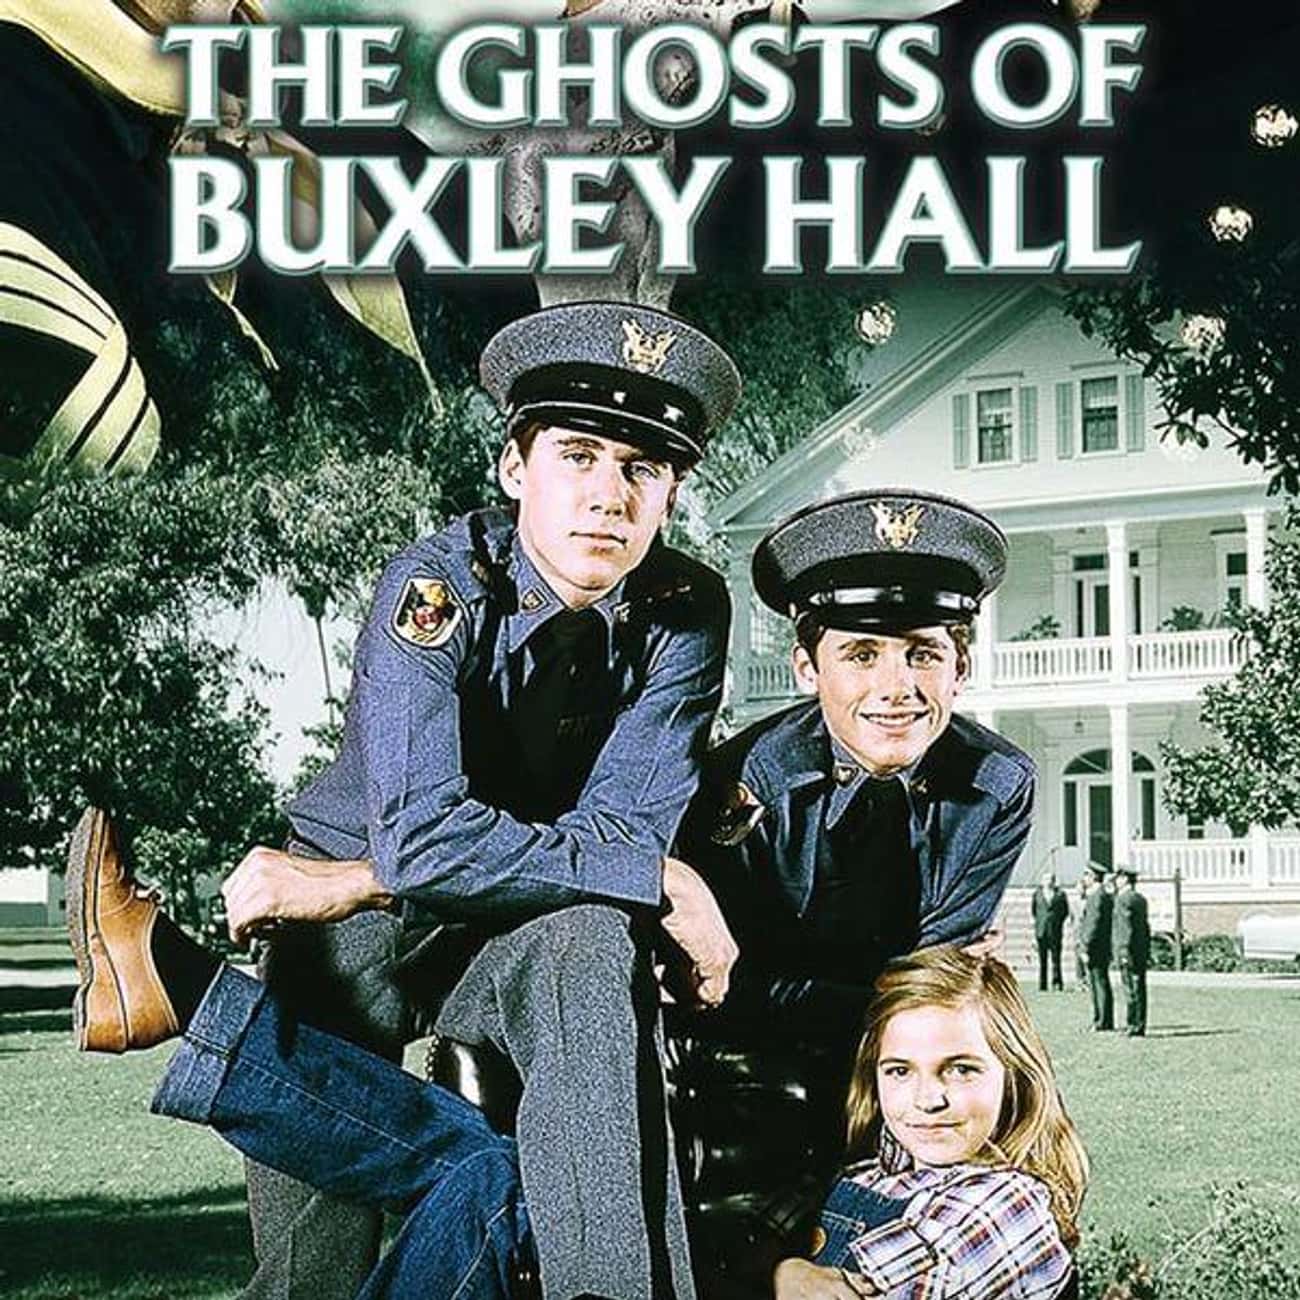 The Ghosts of Buxley Hall